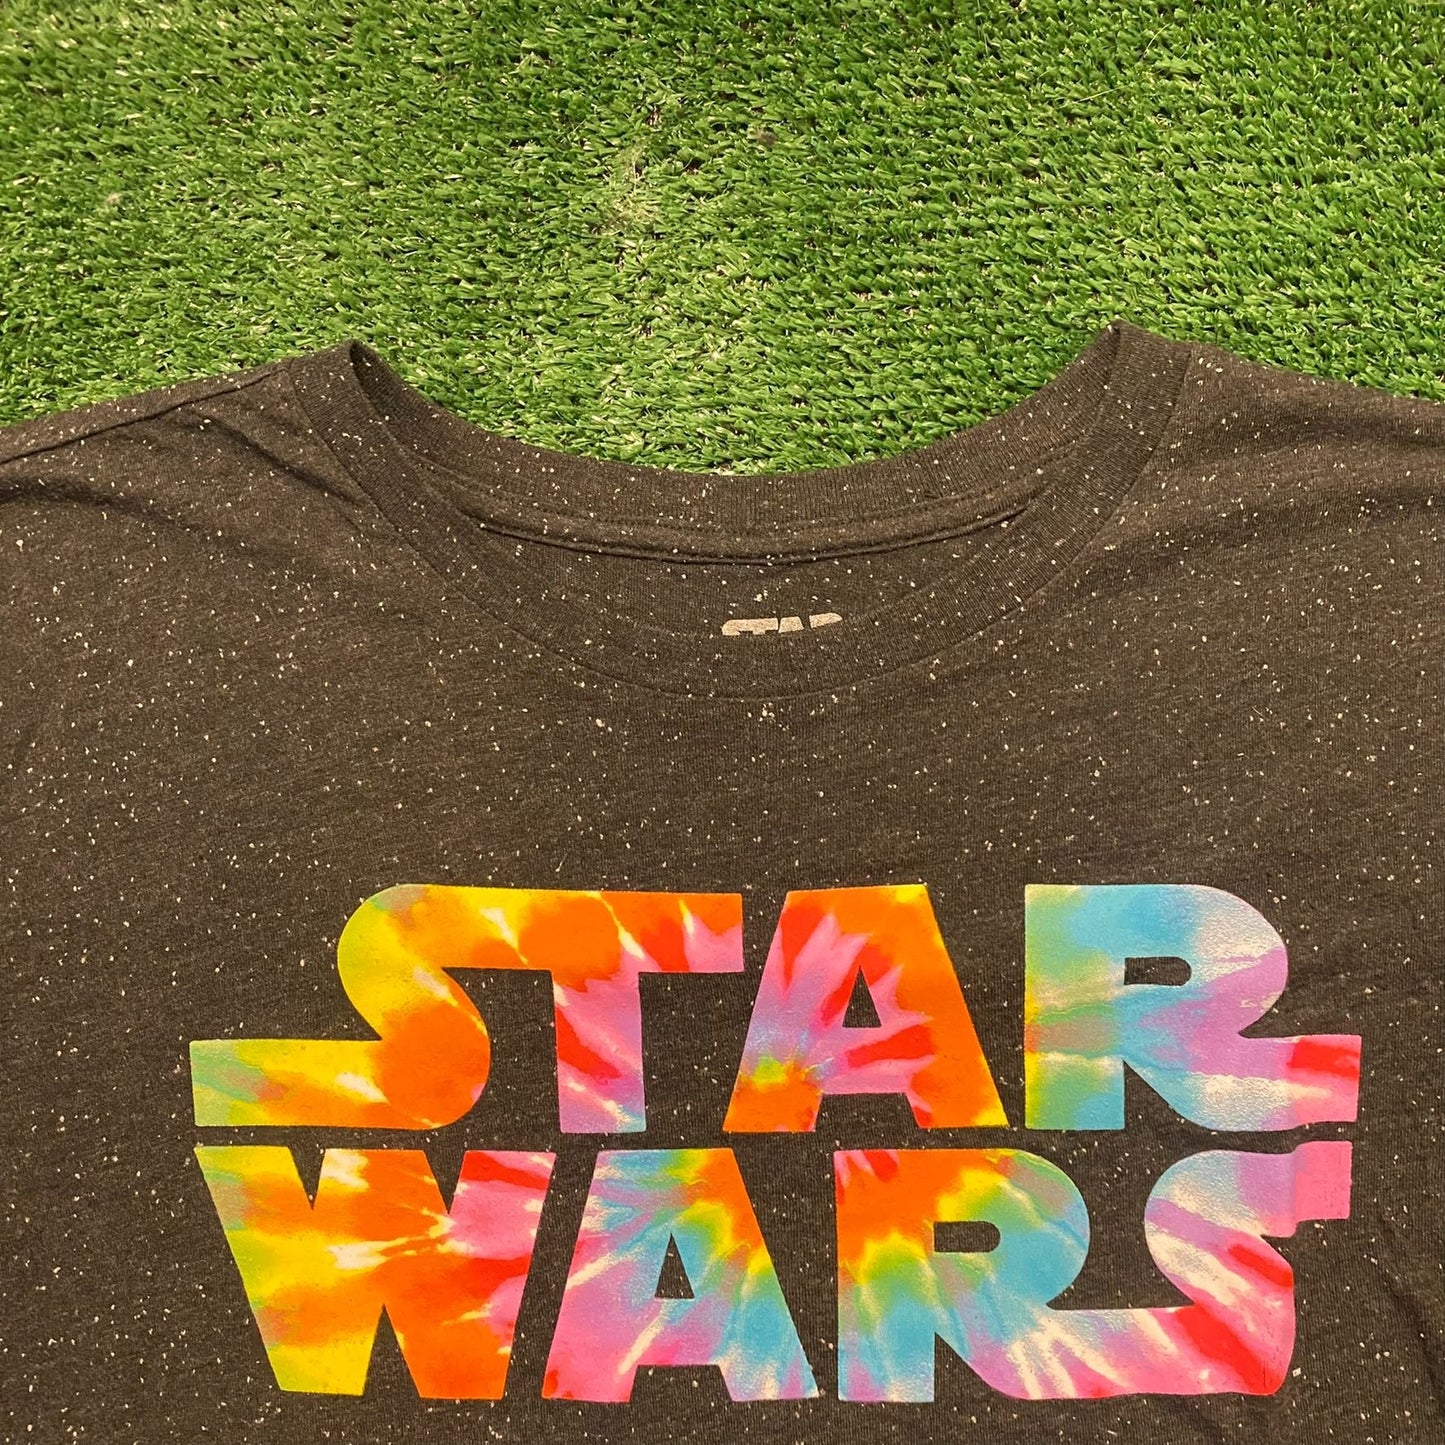 Essential Star Wars Rainbow Spell Out Movie T-Shirt